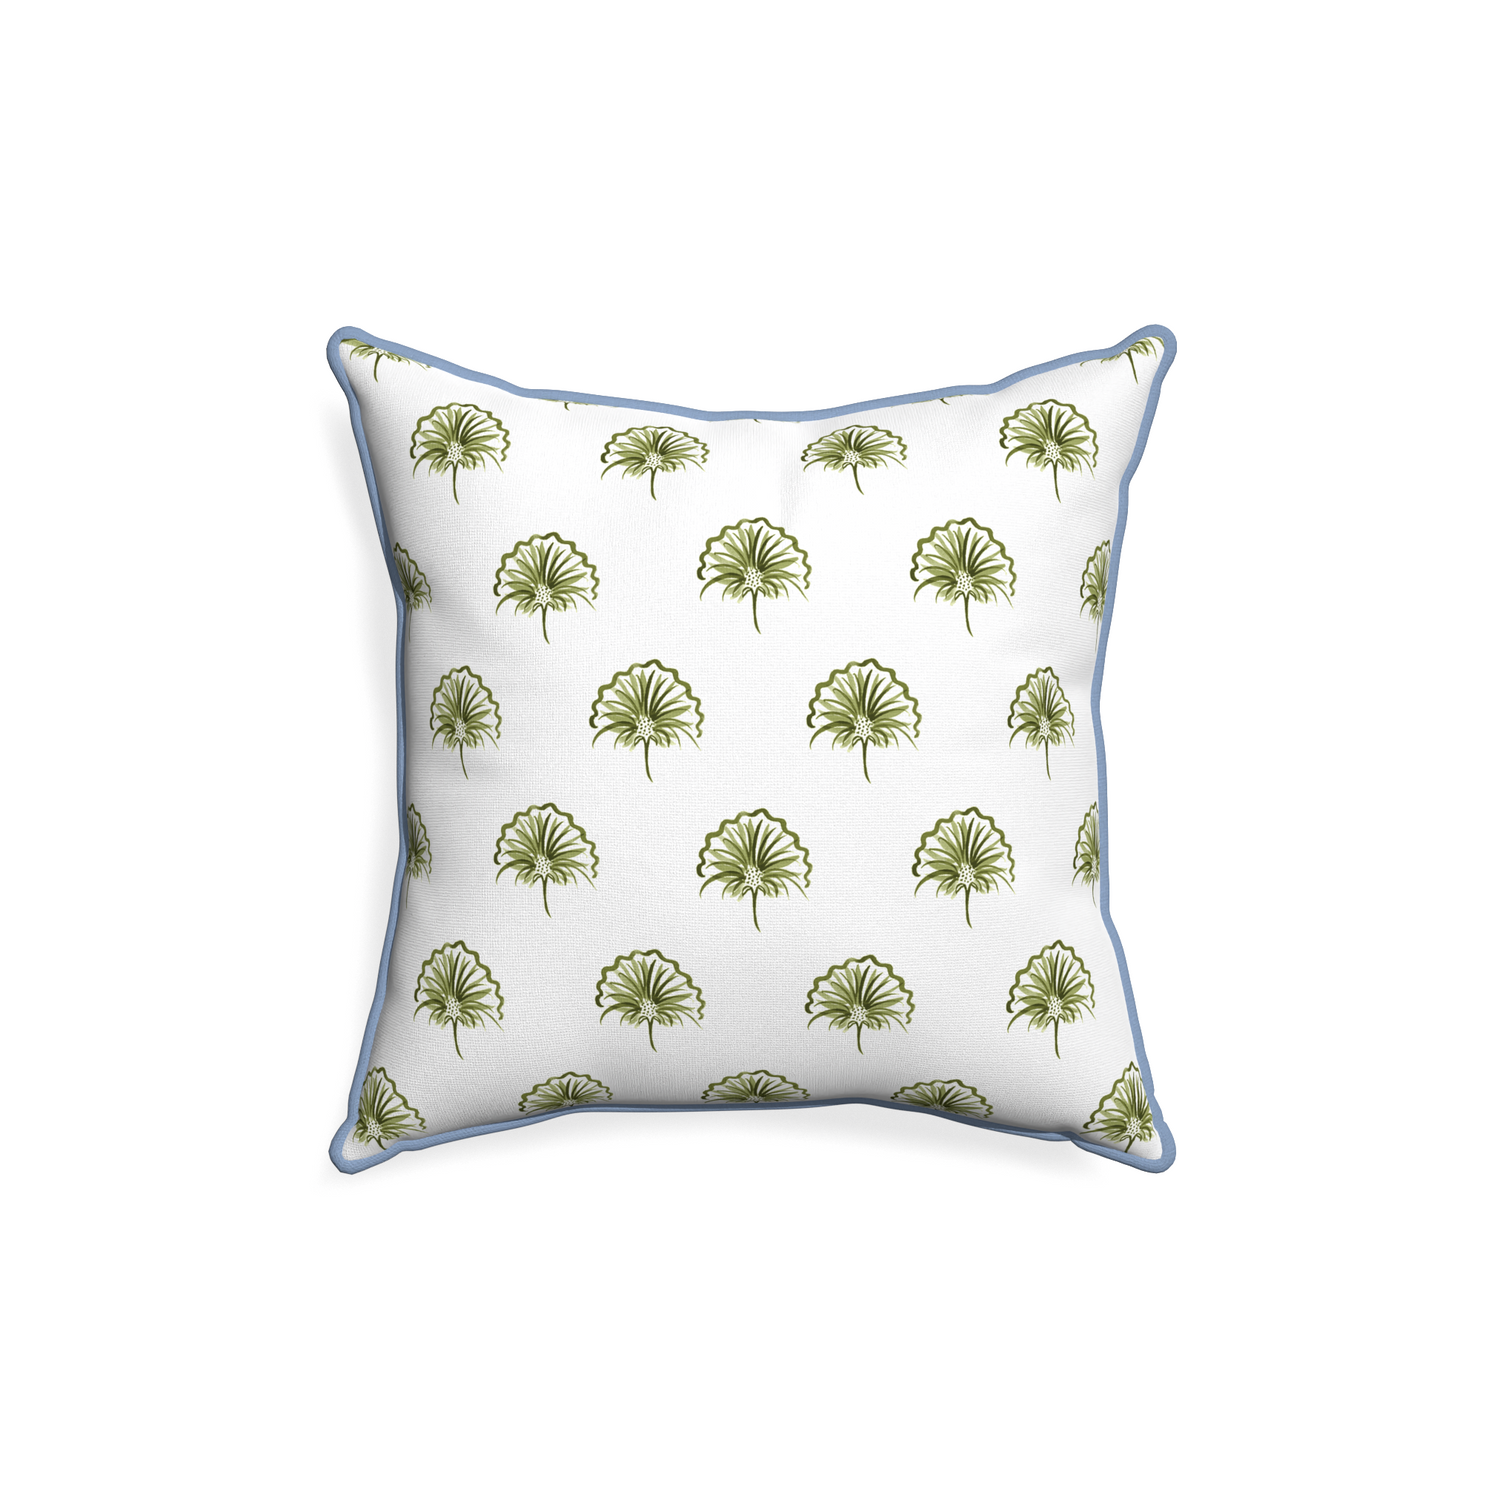 18-square penelope moss custom green floralpillow with sky piping on white background